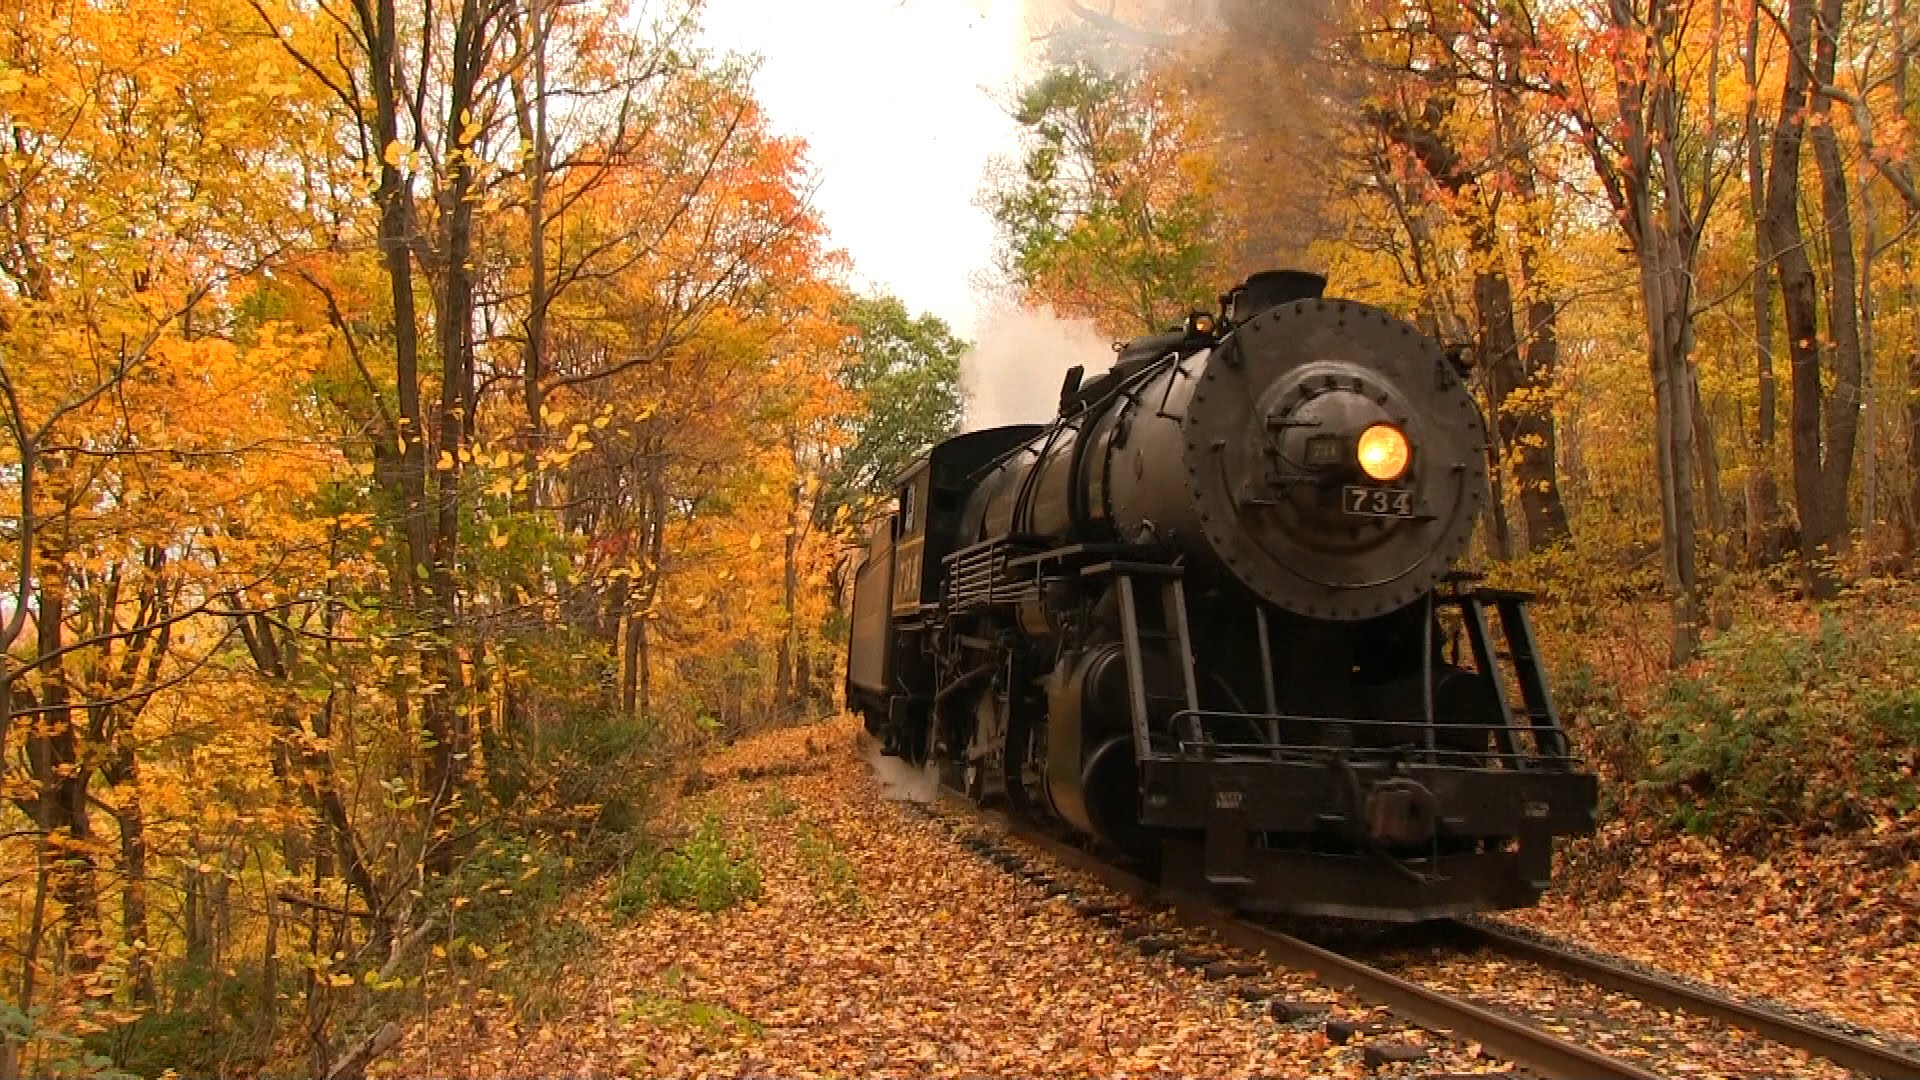 Western Maryland Scenic Railroad's Fall Color Show